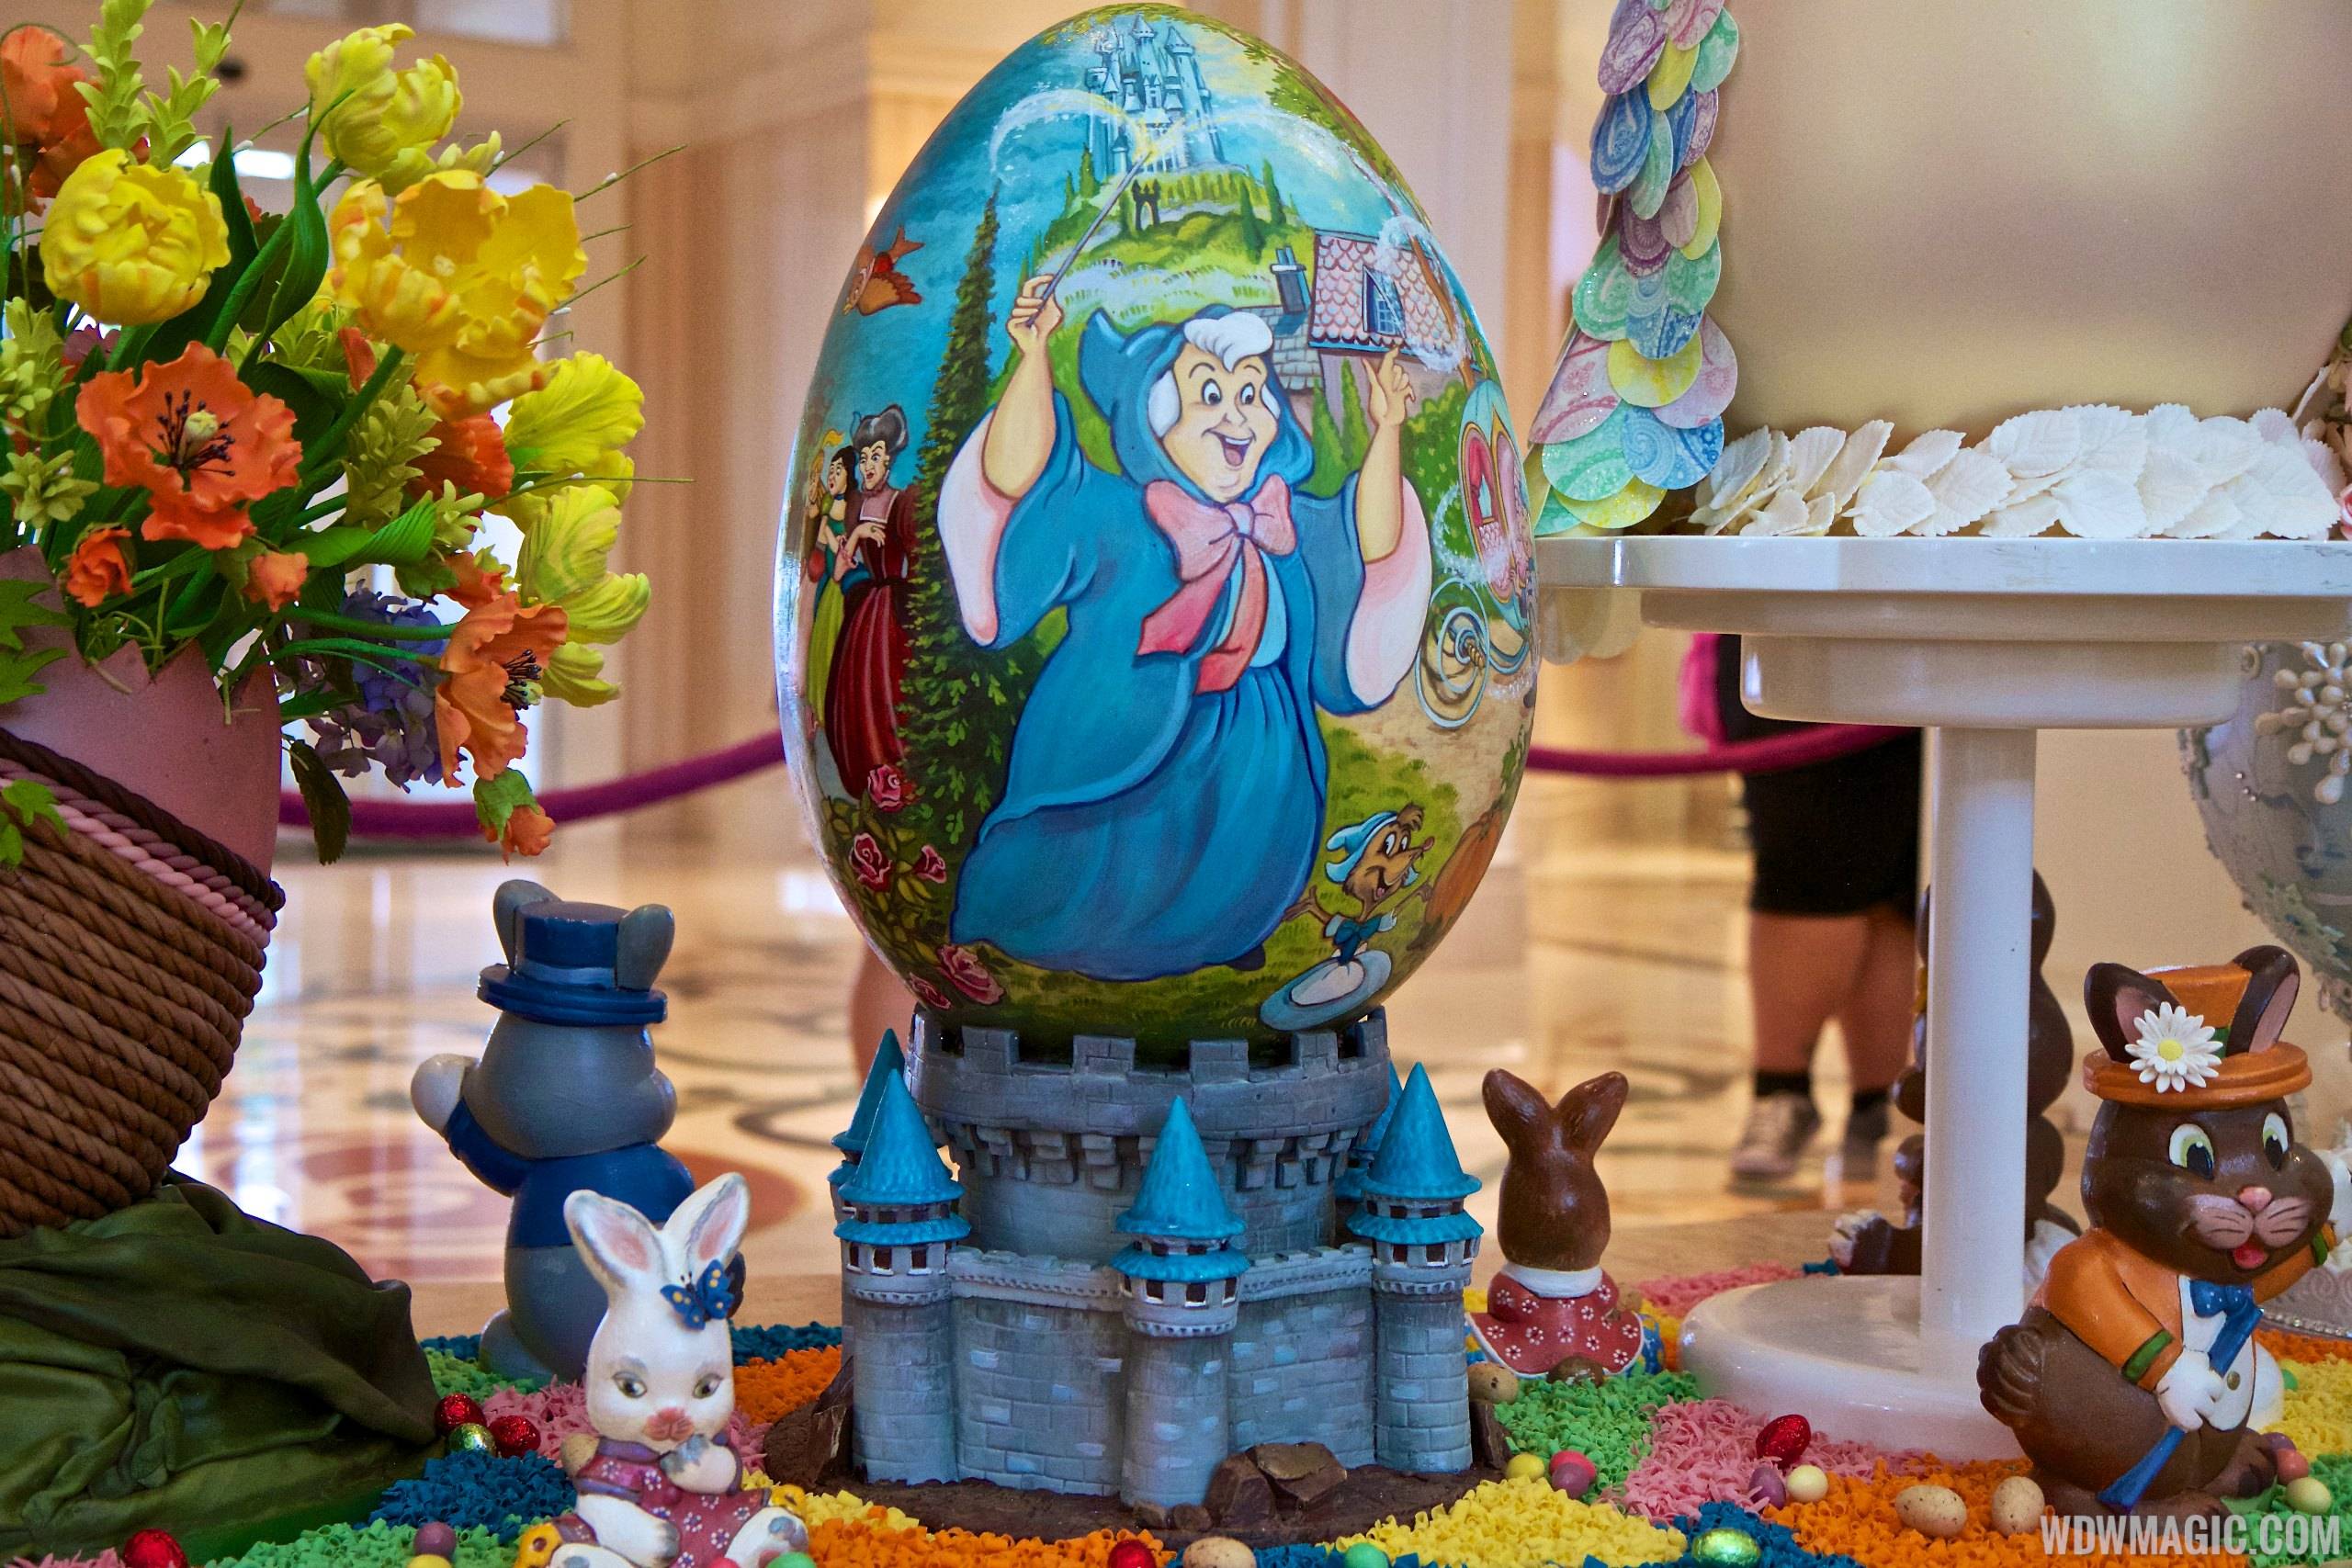 Edible works of art at the Grand Floridian Resort